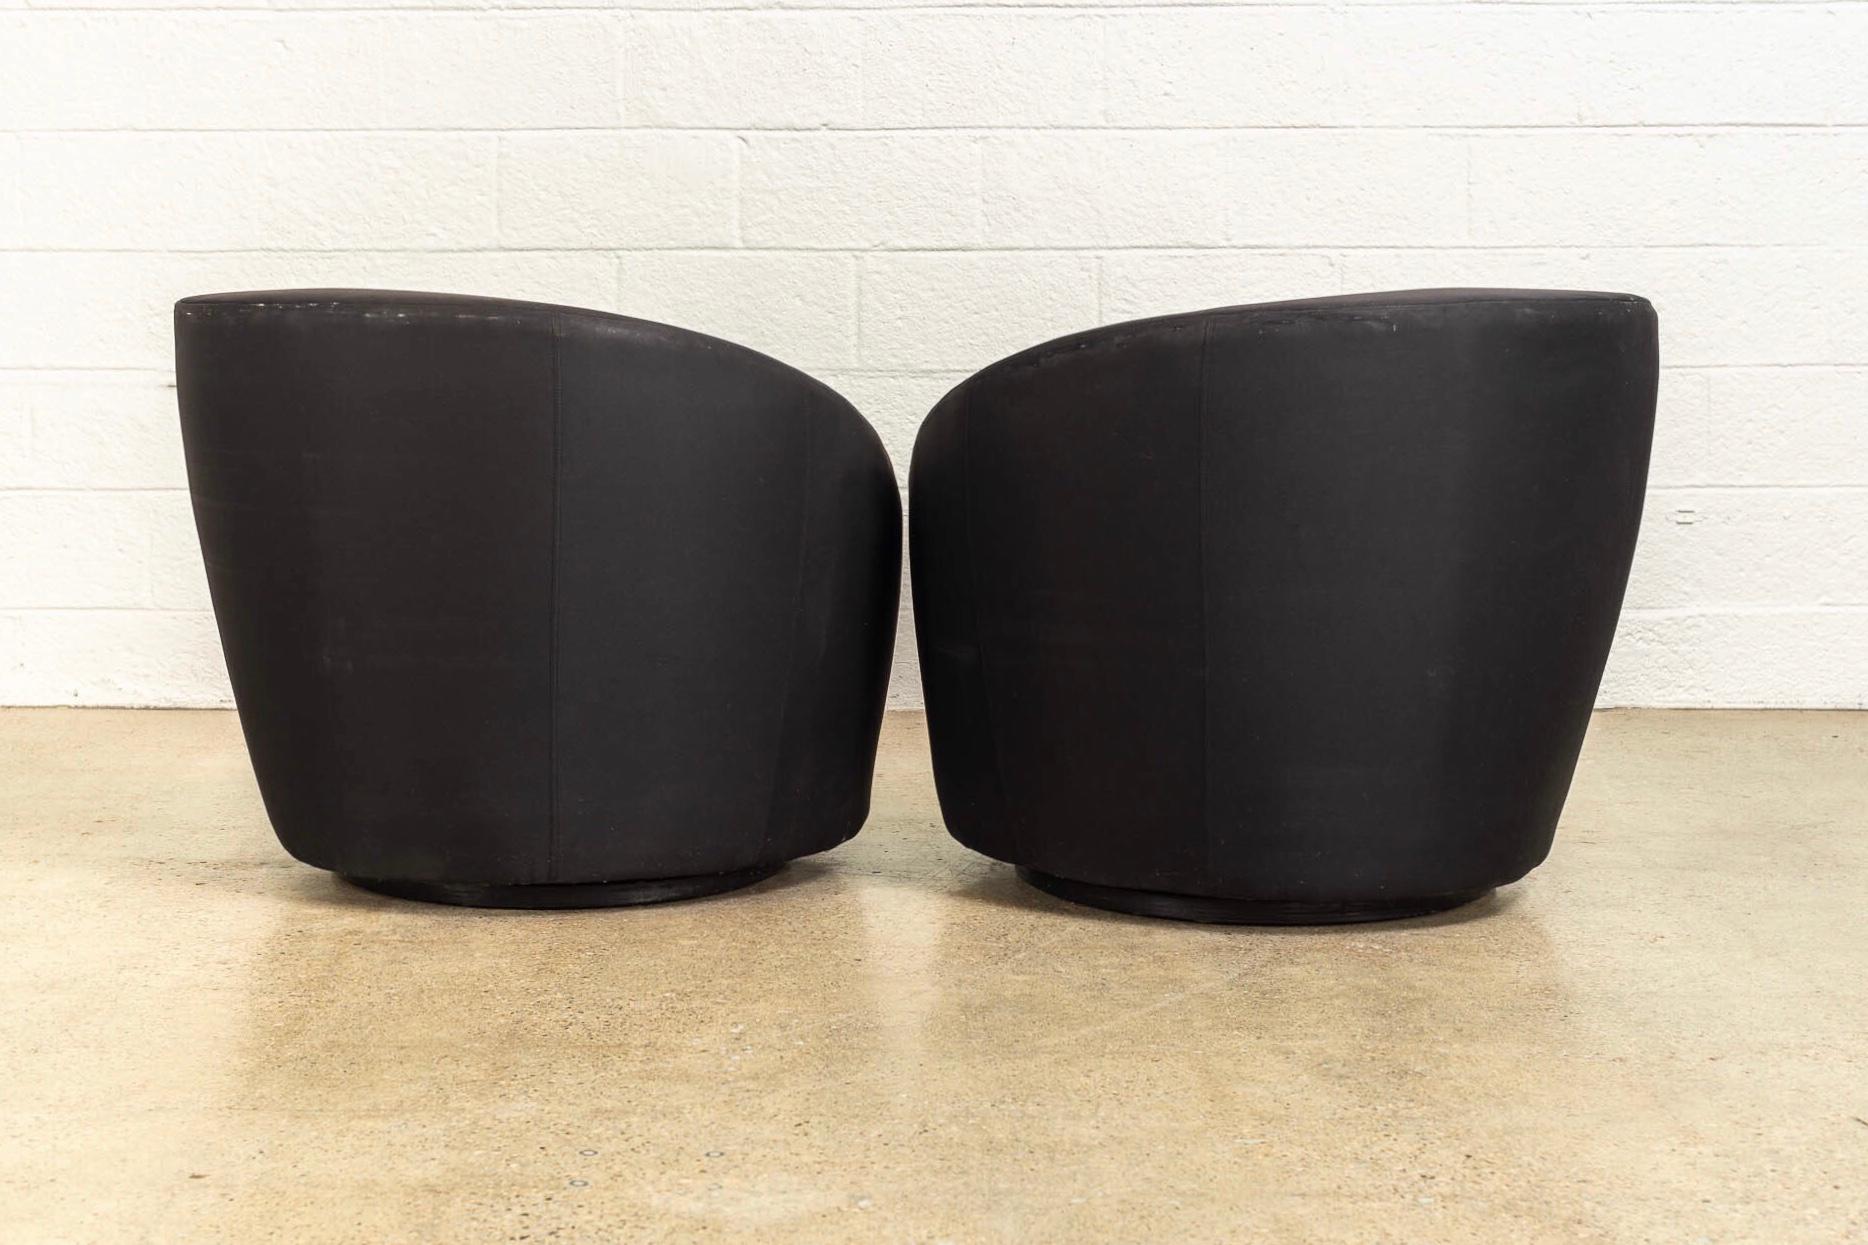 Midcentury Vladimir Kagan for Directional Black Nautilus Lounge Chairs, a Pair In Good Condition For Sale In Detroit, MI